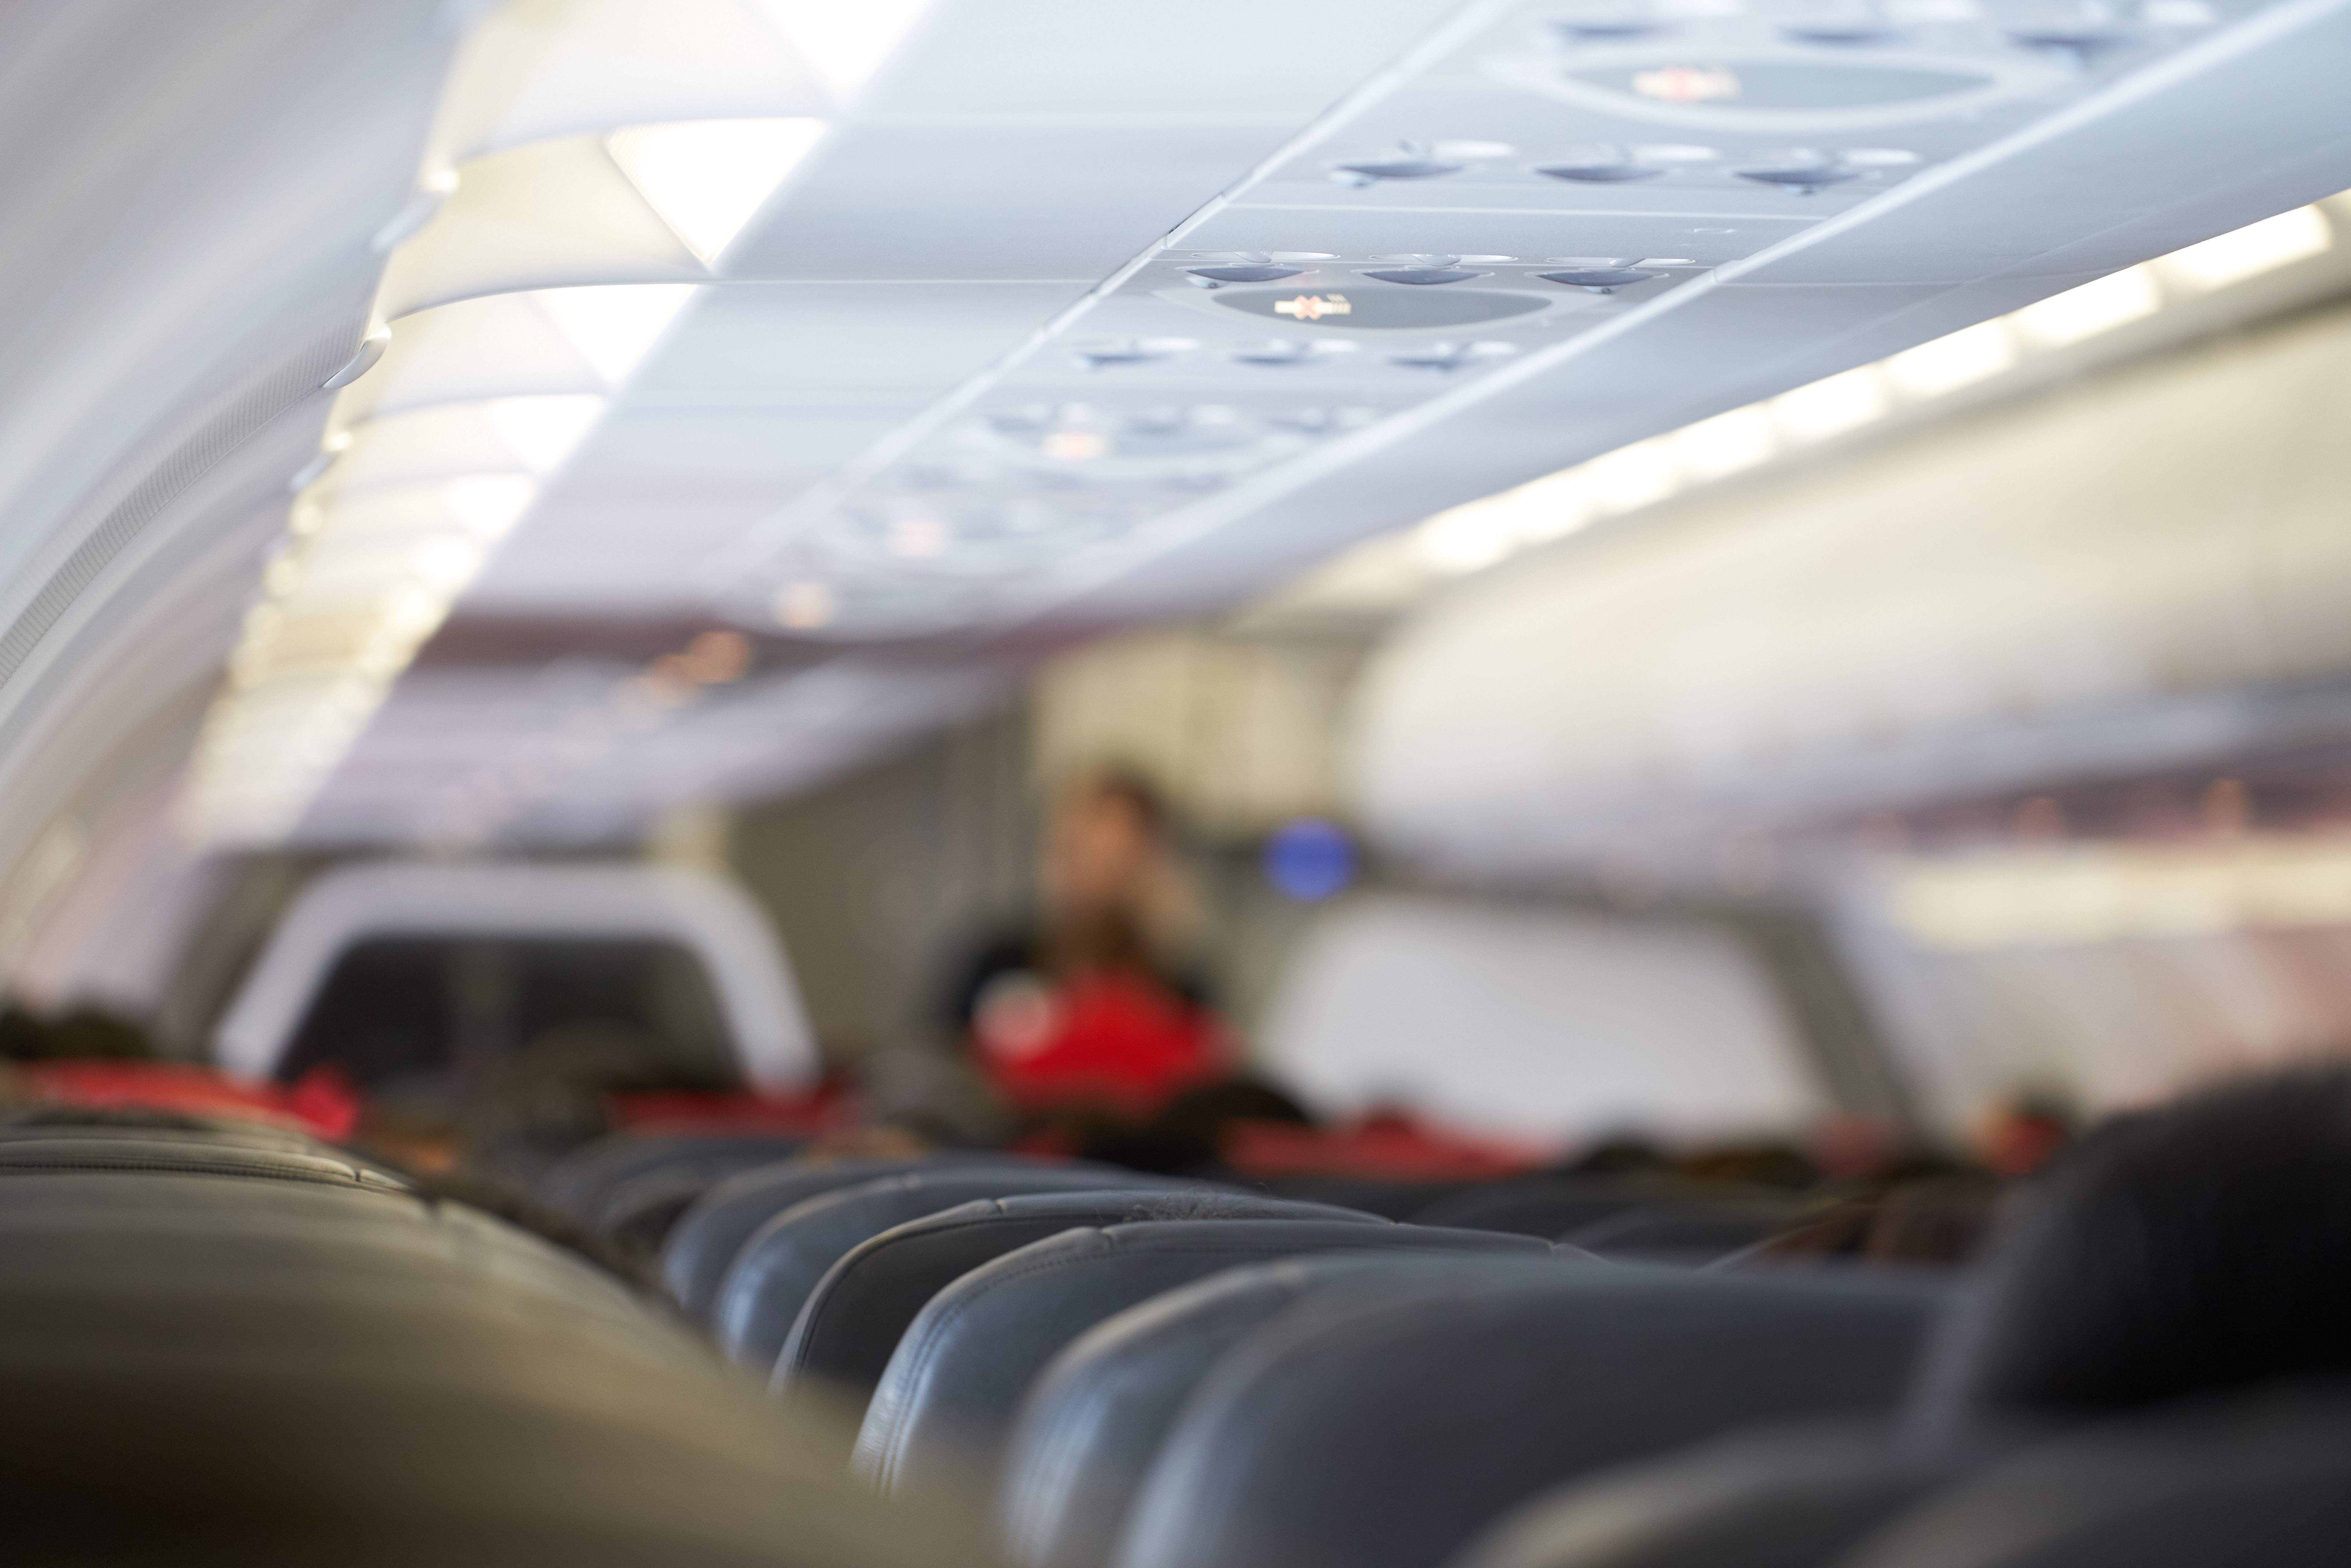 Injured During a Flight - Are You Entitled to Compensation?